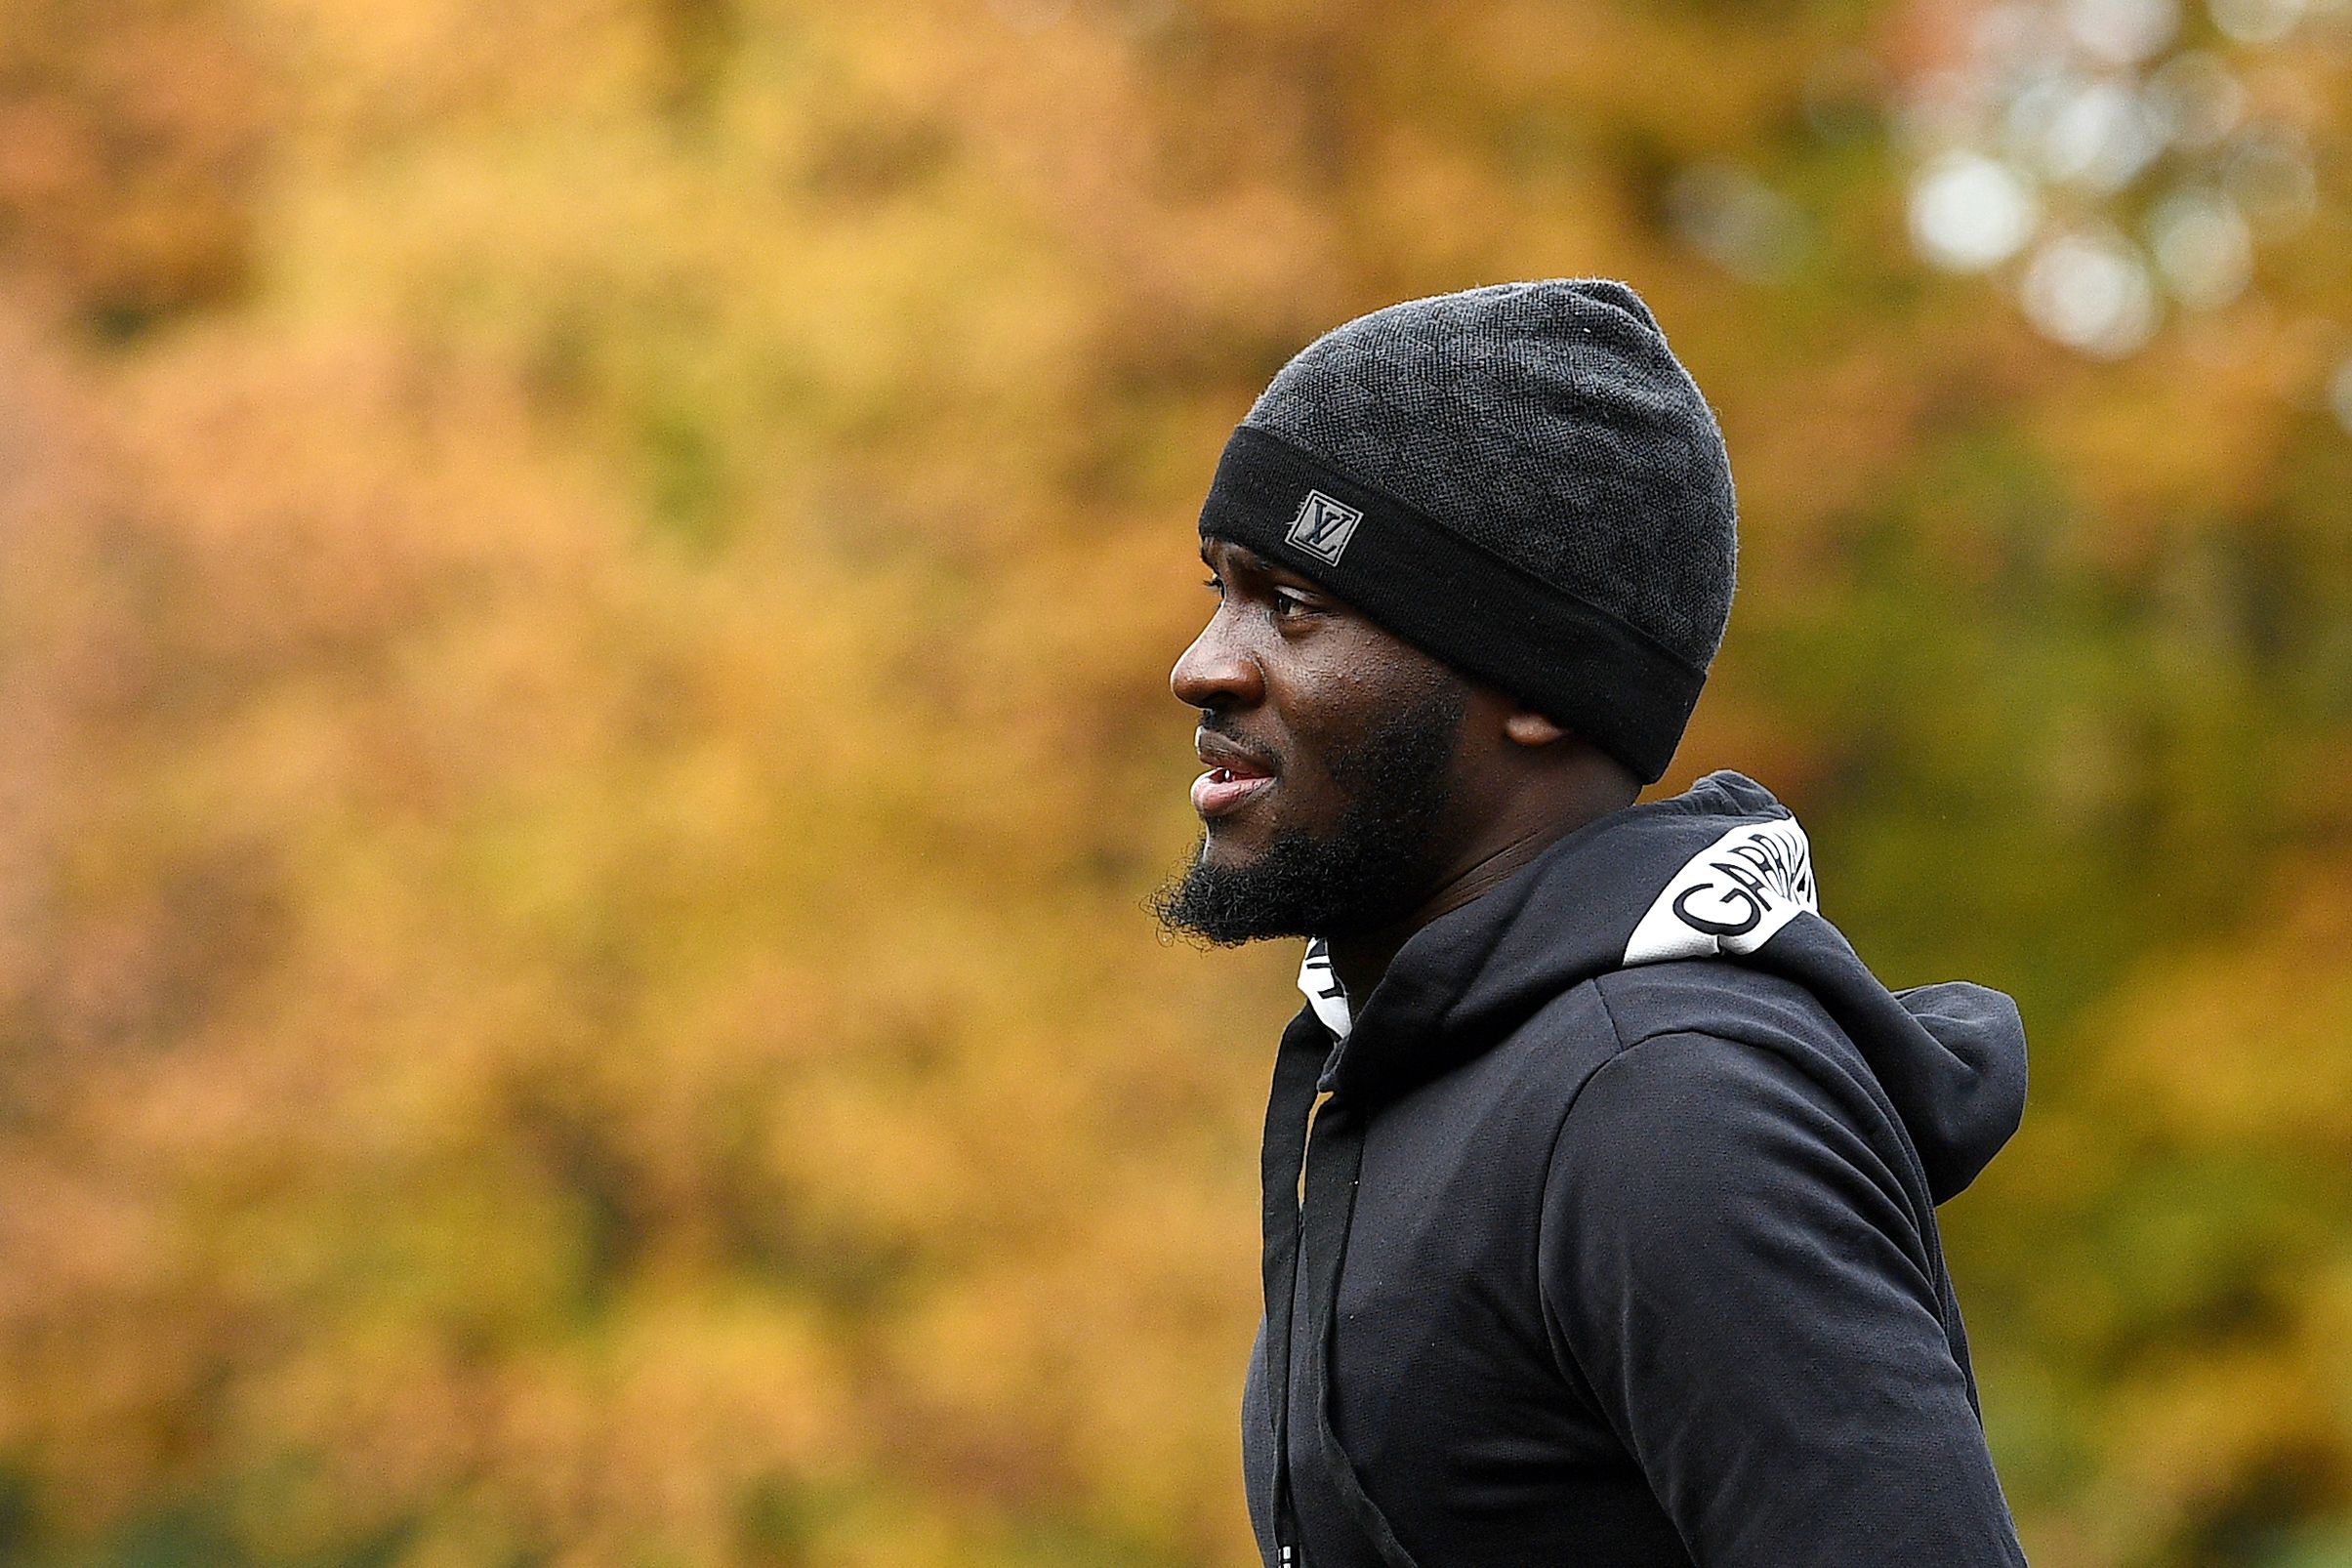 France's midfielder Tanguy NDombele Alvaro arrives in Clairefontaine-en-Yvelines on November 12, 2018, as part of the team's preparation for the upcoming Nations League football match against the Netherlands and a friendly football match against Uruguay. (Photo by FRANCK FIFE / AFP) (Photo credit should read FRANCK FIFE/AFP/Getty Images)